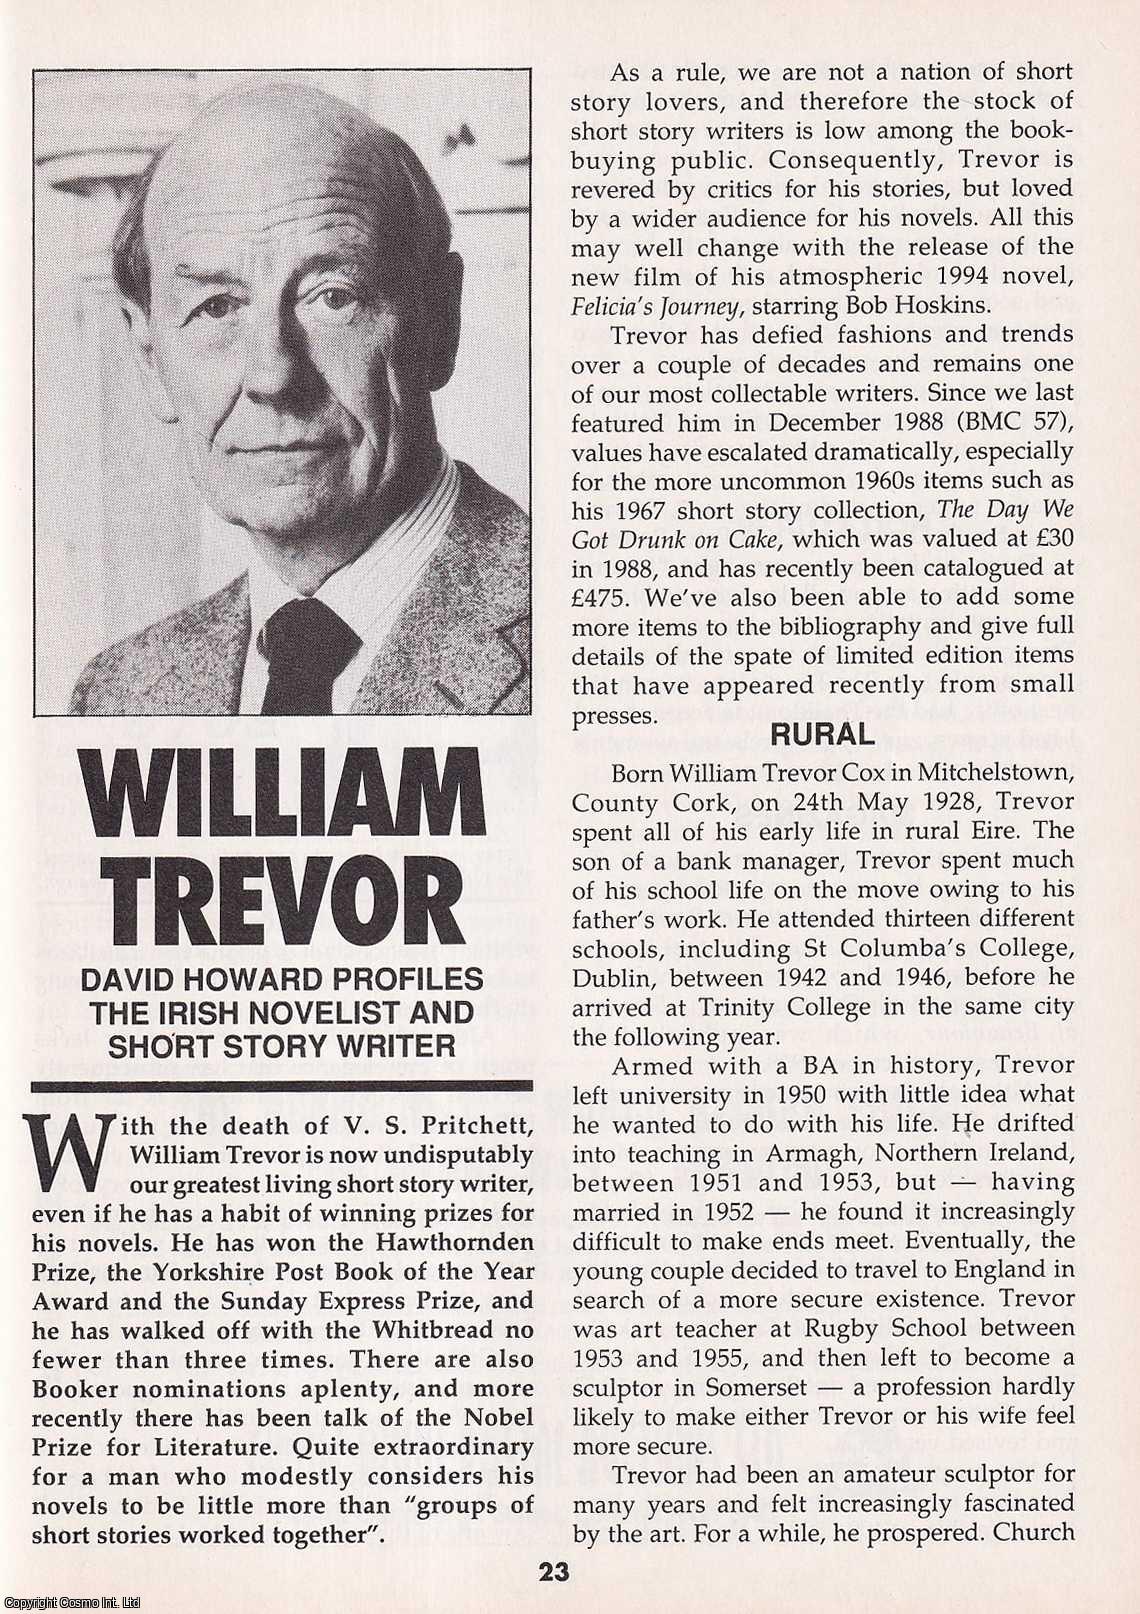 David Howard - William Trevor. The Irish Novelist and Short Story Writer. This is an original article separated from an issue of The Book & Magazine Collector publication, 1999.